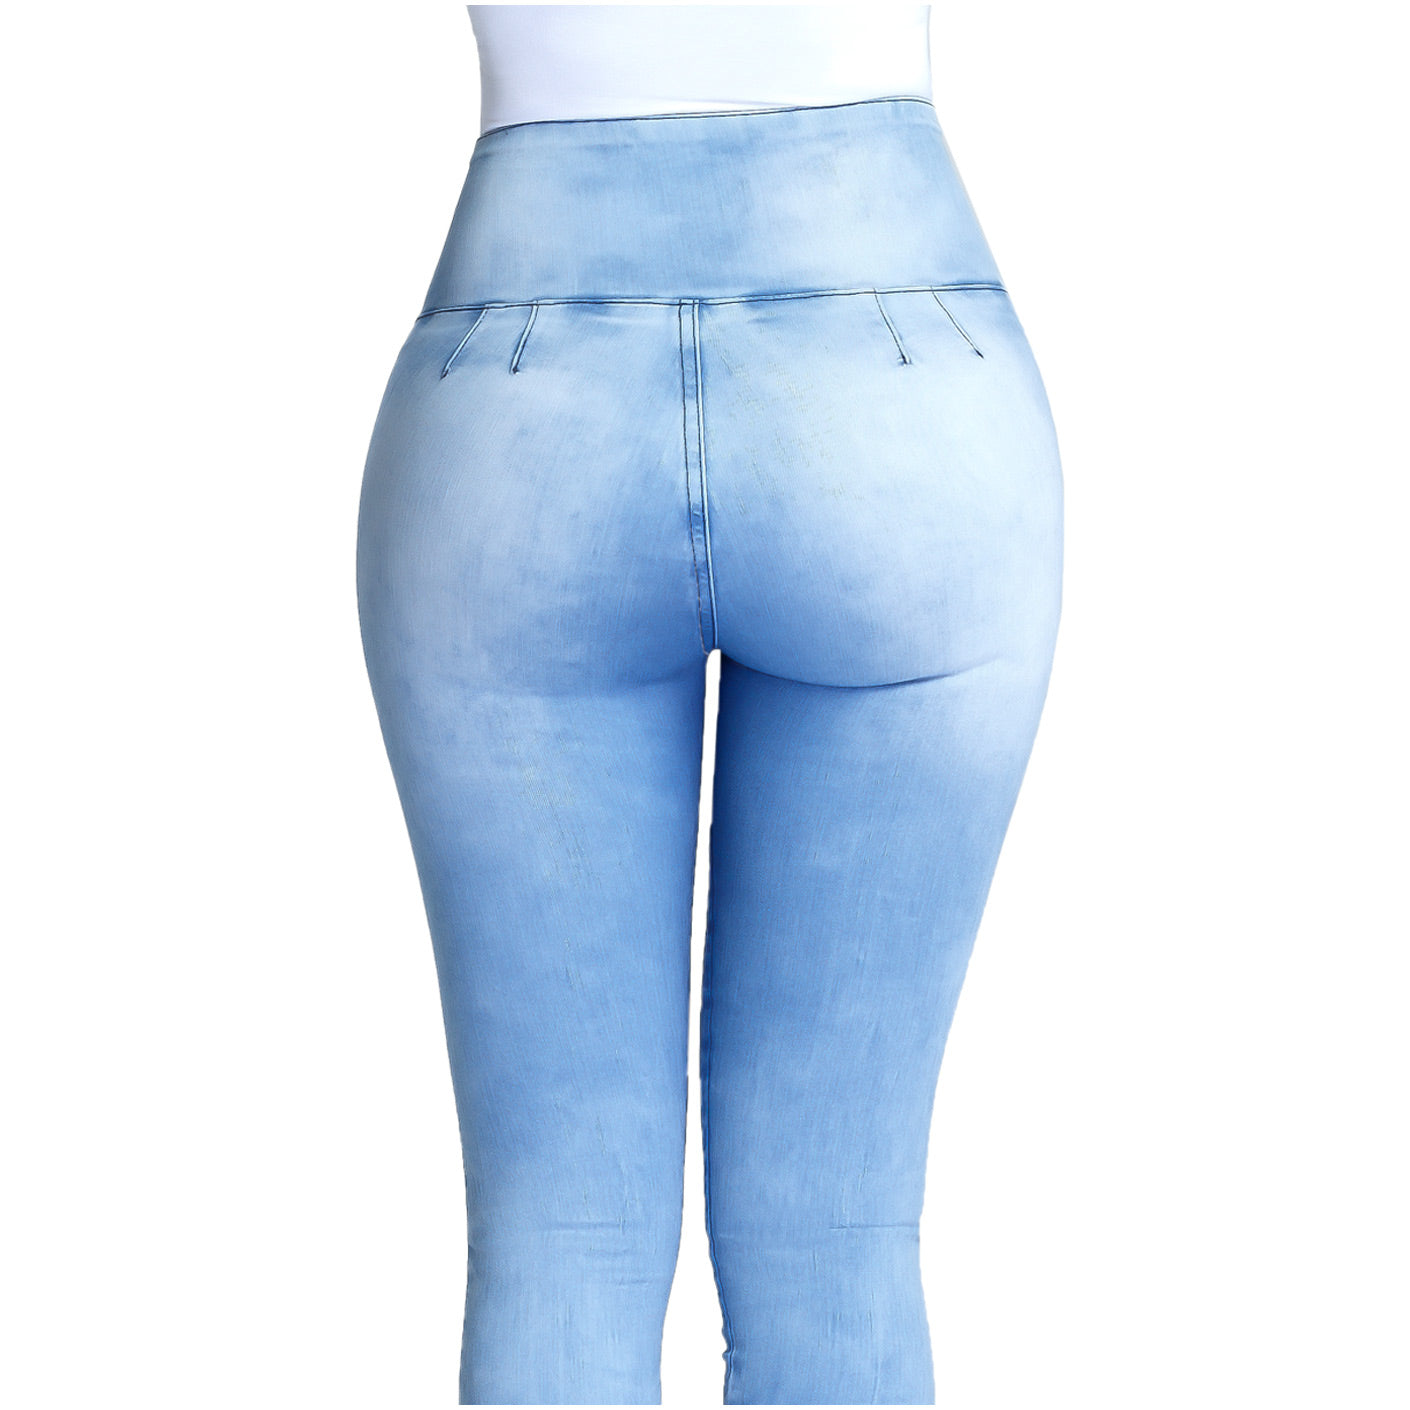 Lowla Jeans: 217988 - Bum and Hip Enhancing Pants with Removable